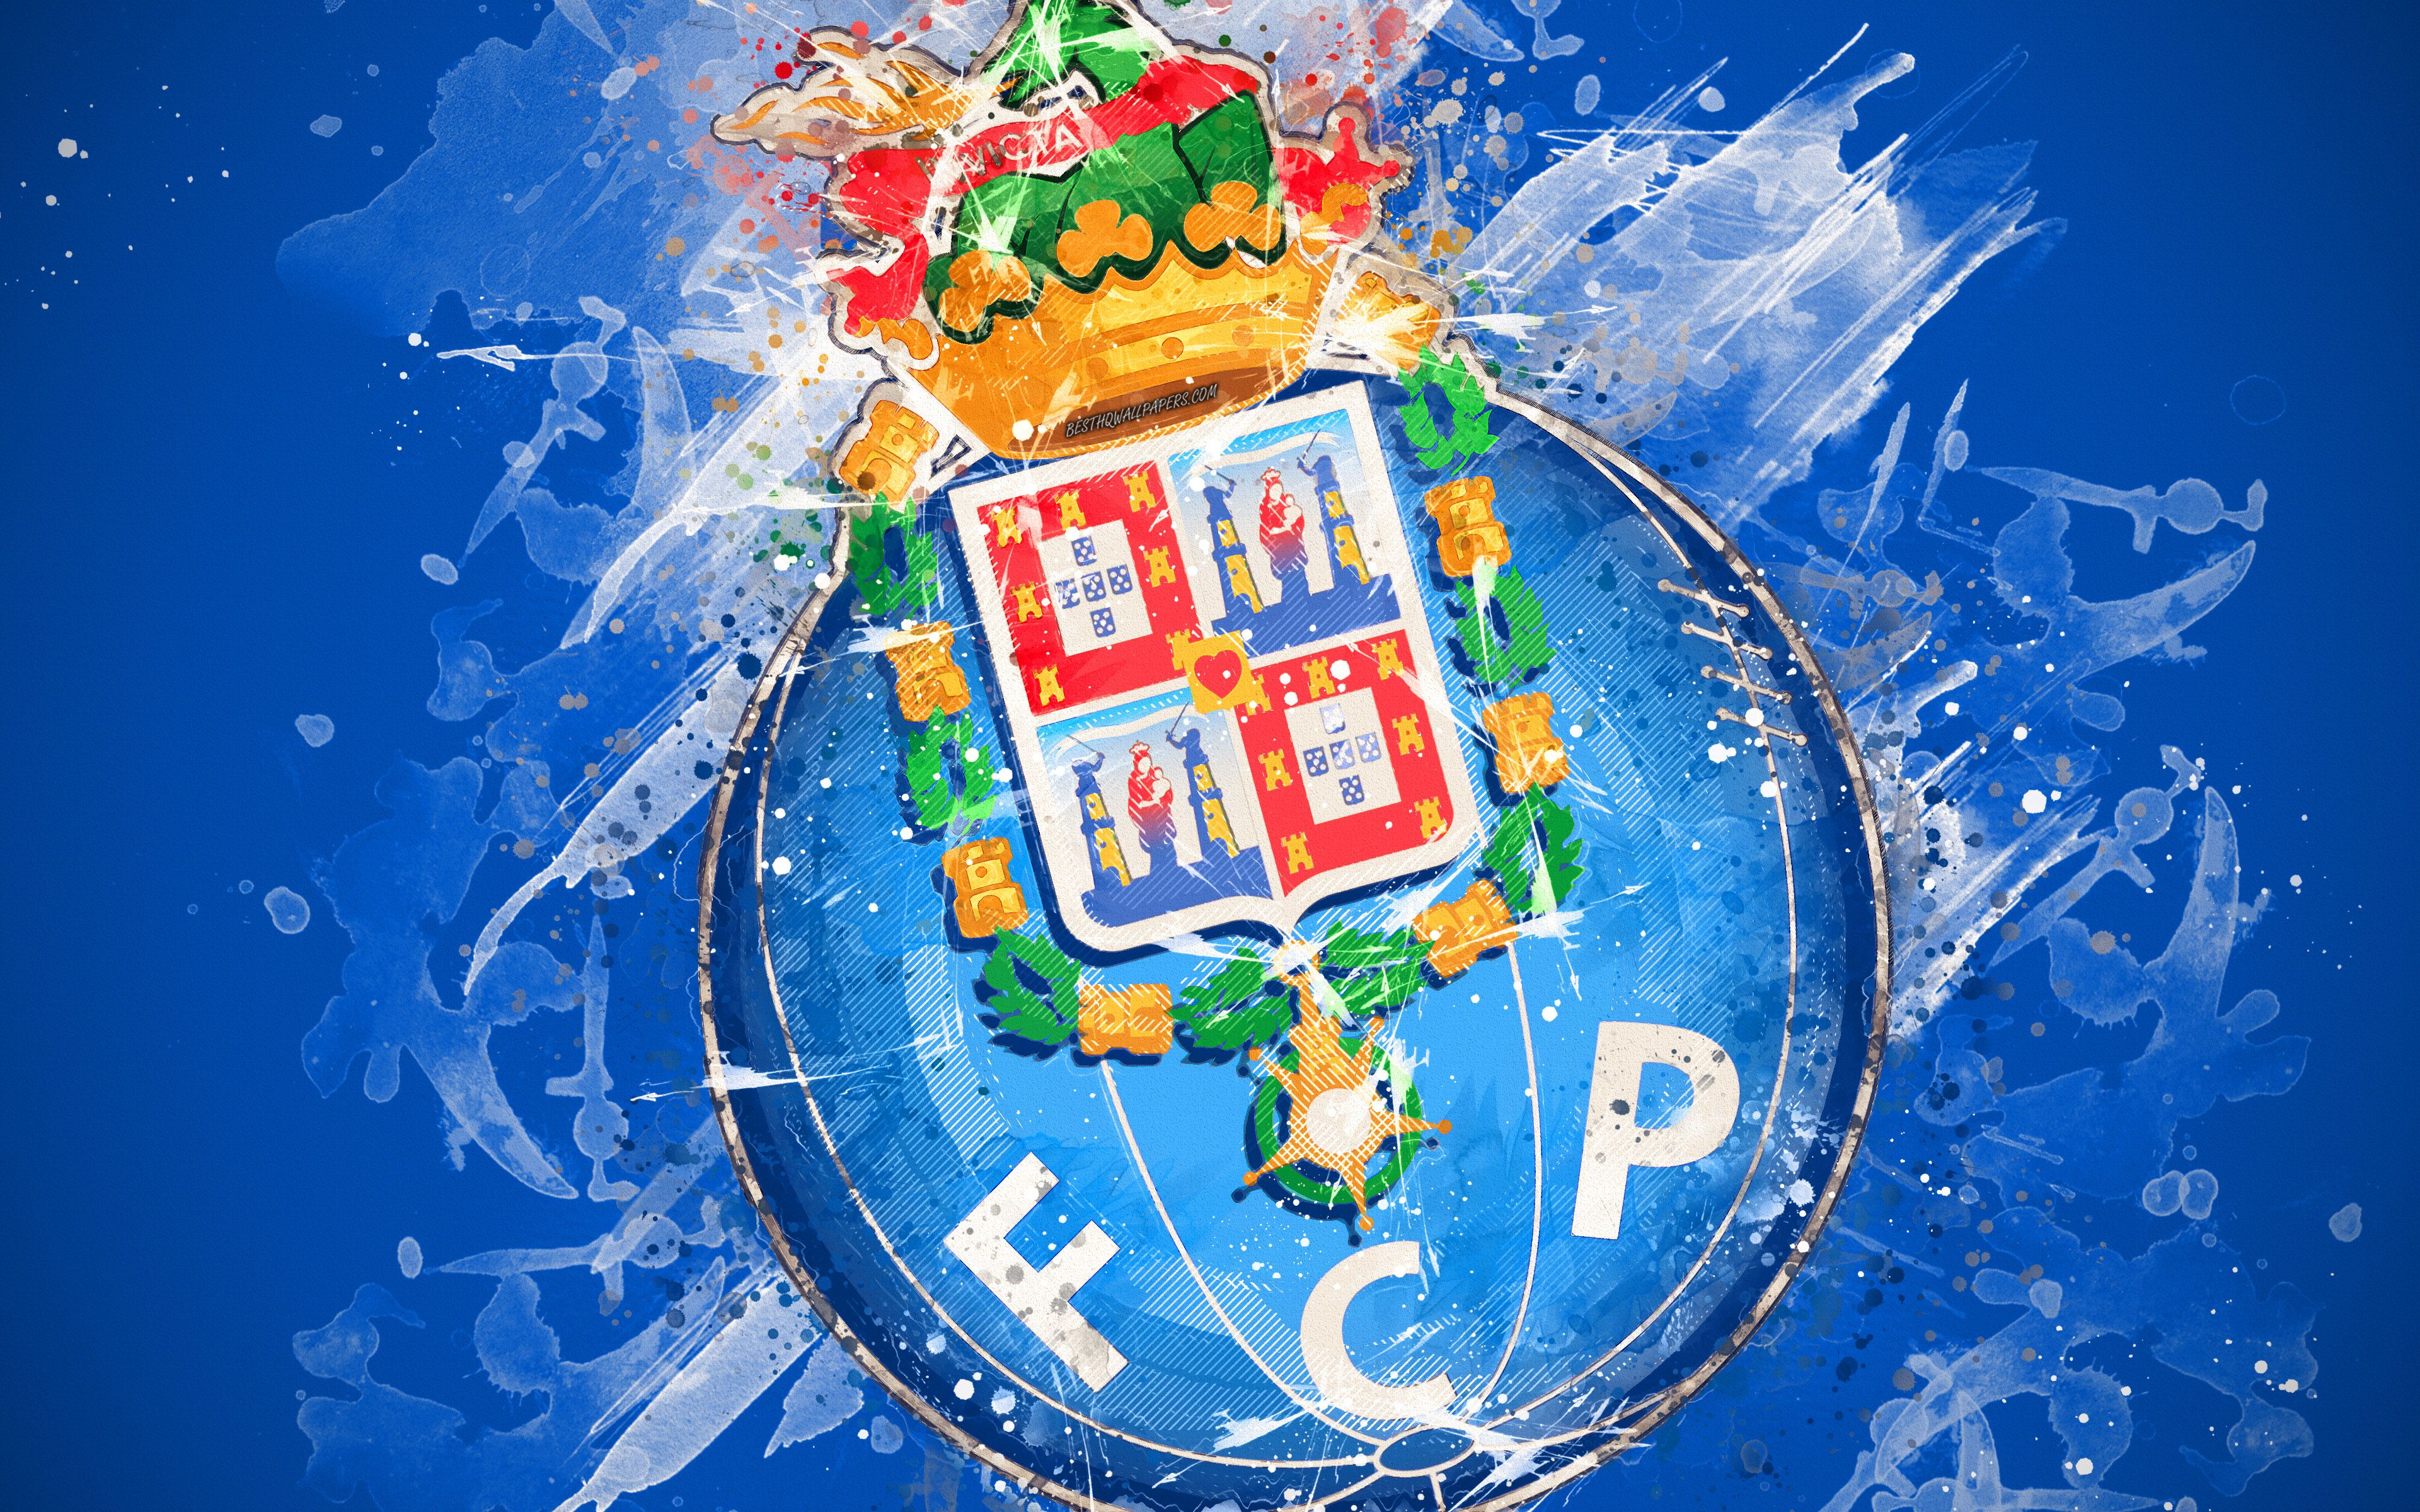 Download wallpaper FC Porto, 4k, paint art, logo, creative, Portuguese football team, Primeira Liga, emblem, blue background, grunge style, Porto, Portugal, football for desktop with resolution 3840x2400. High Quality HD picture wallpaper